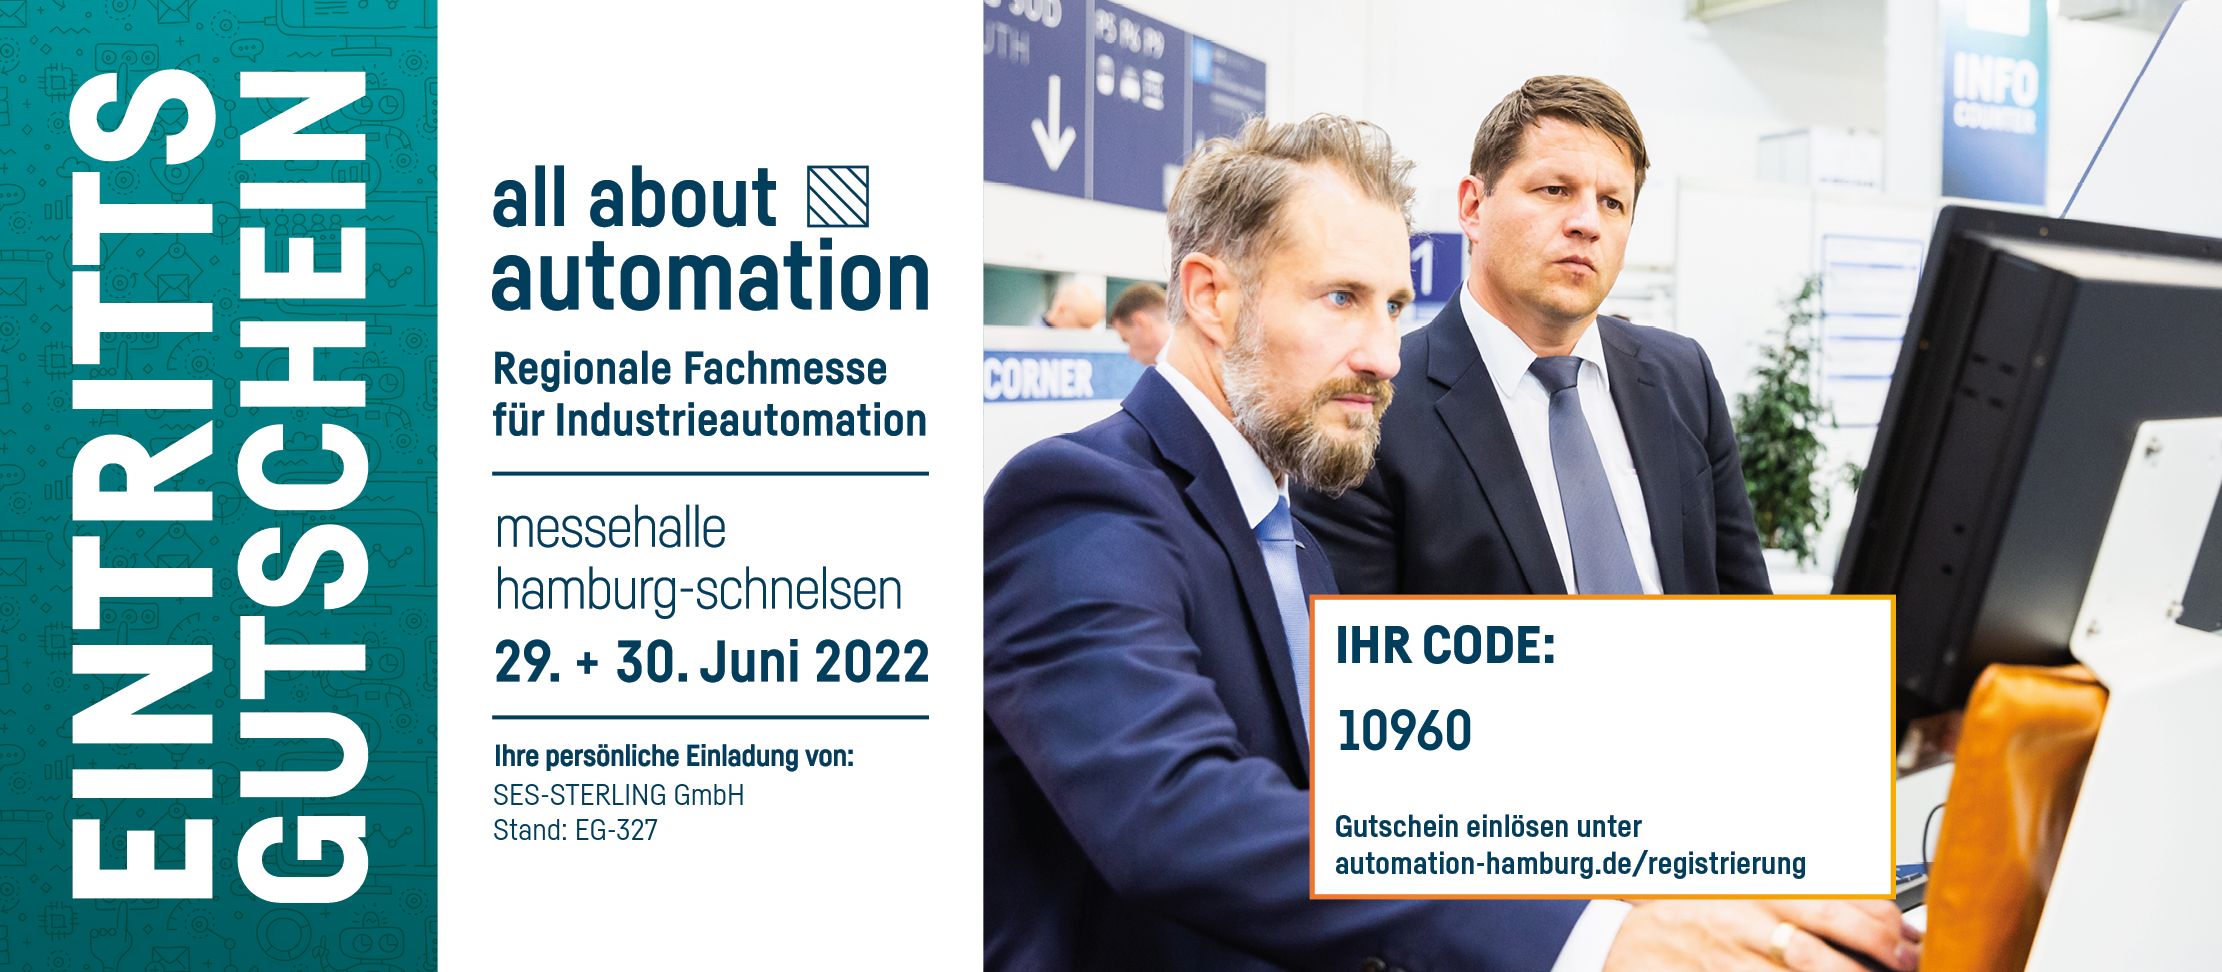 SES-STERLING All About Automation Hamburg free